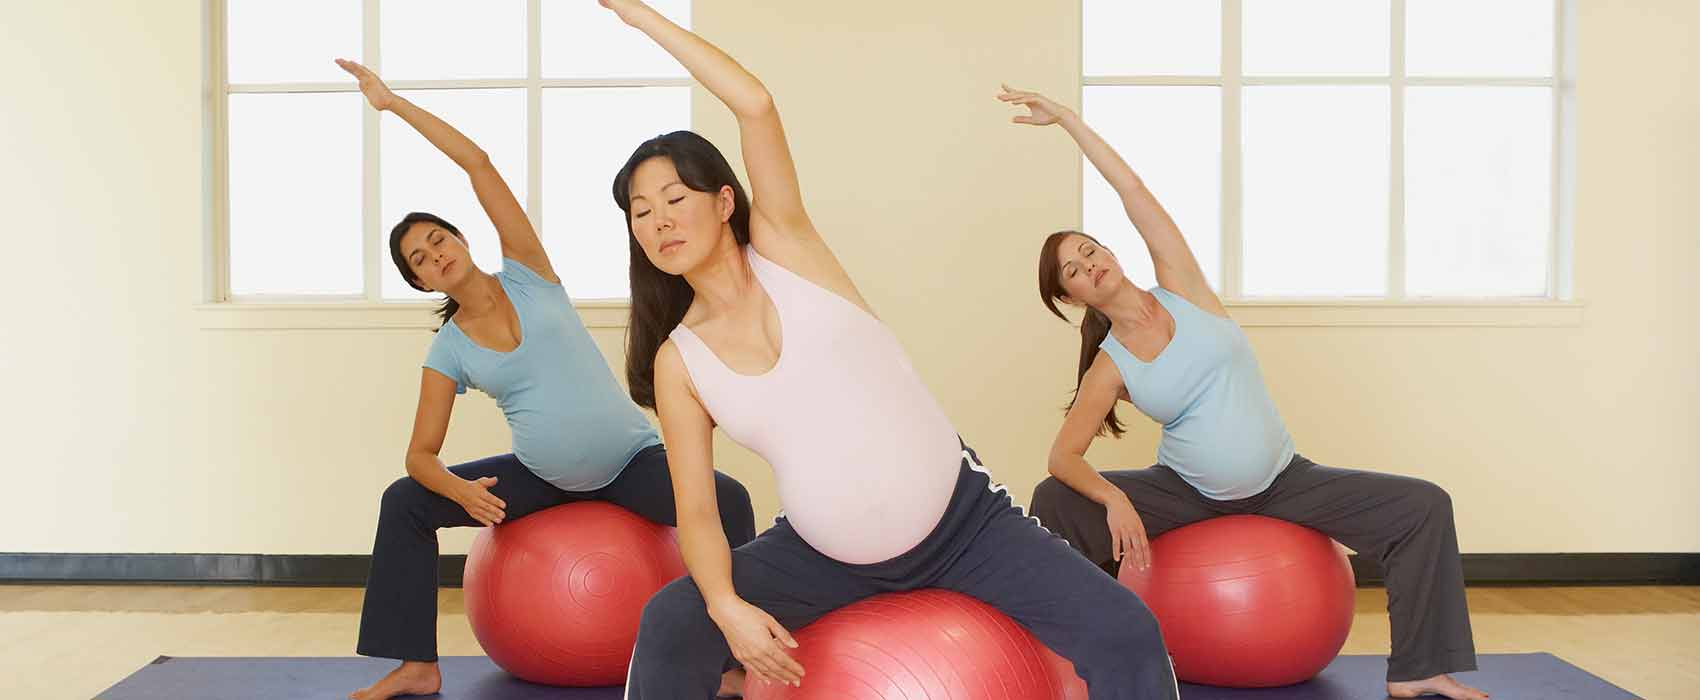 Pregnant woman stretching at a birthing class